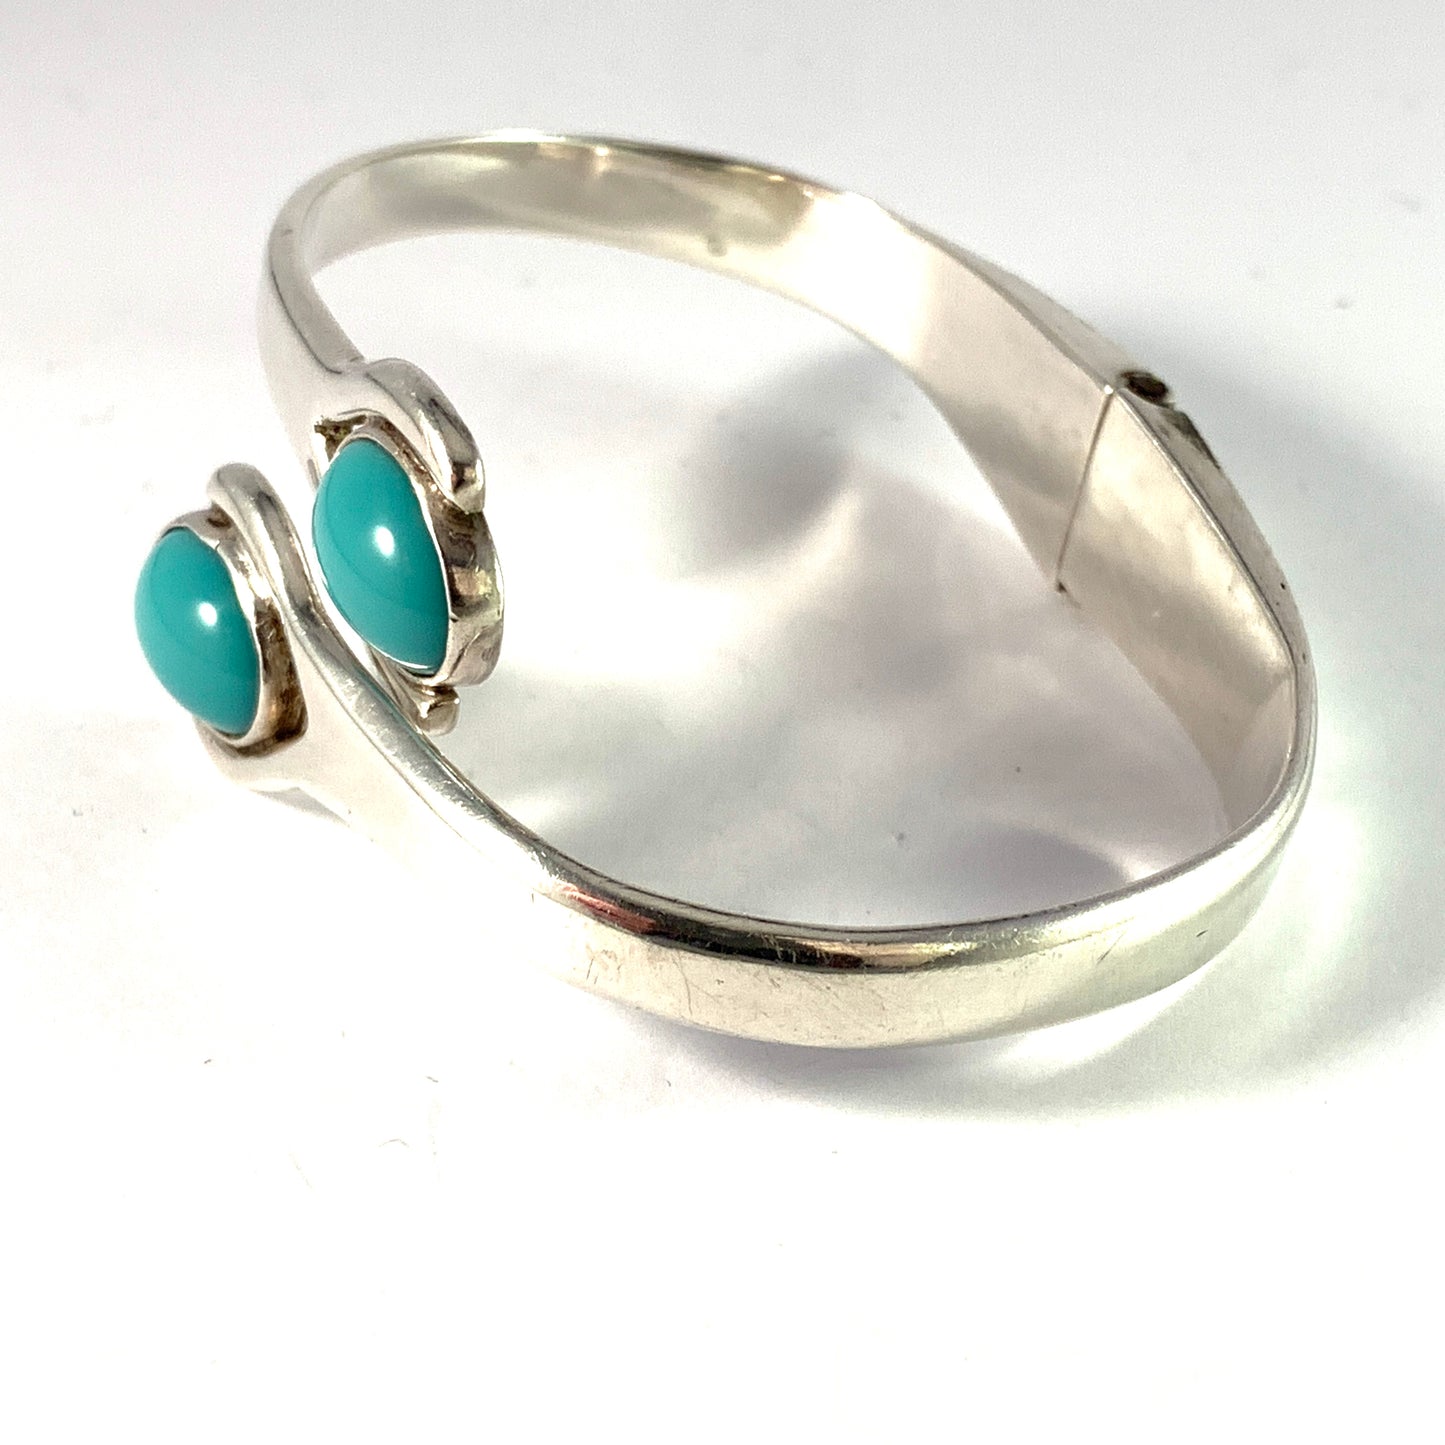 Taxco, Mexico. Vintage 1960s Sterling Silver Turquoise Clamper Spring Cuff Bracelet.